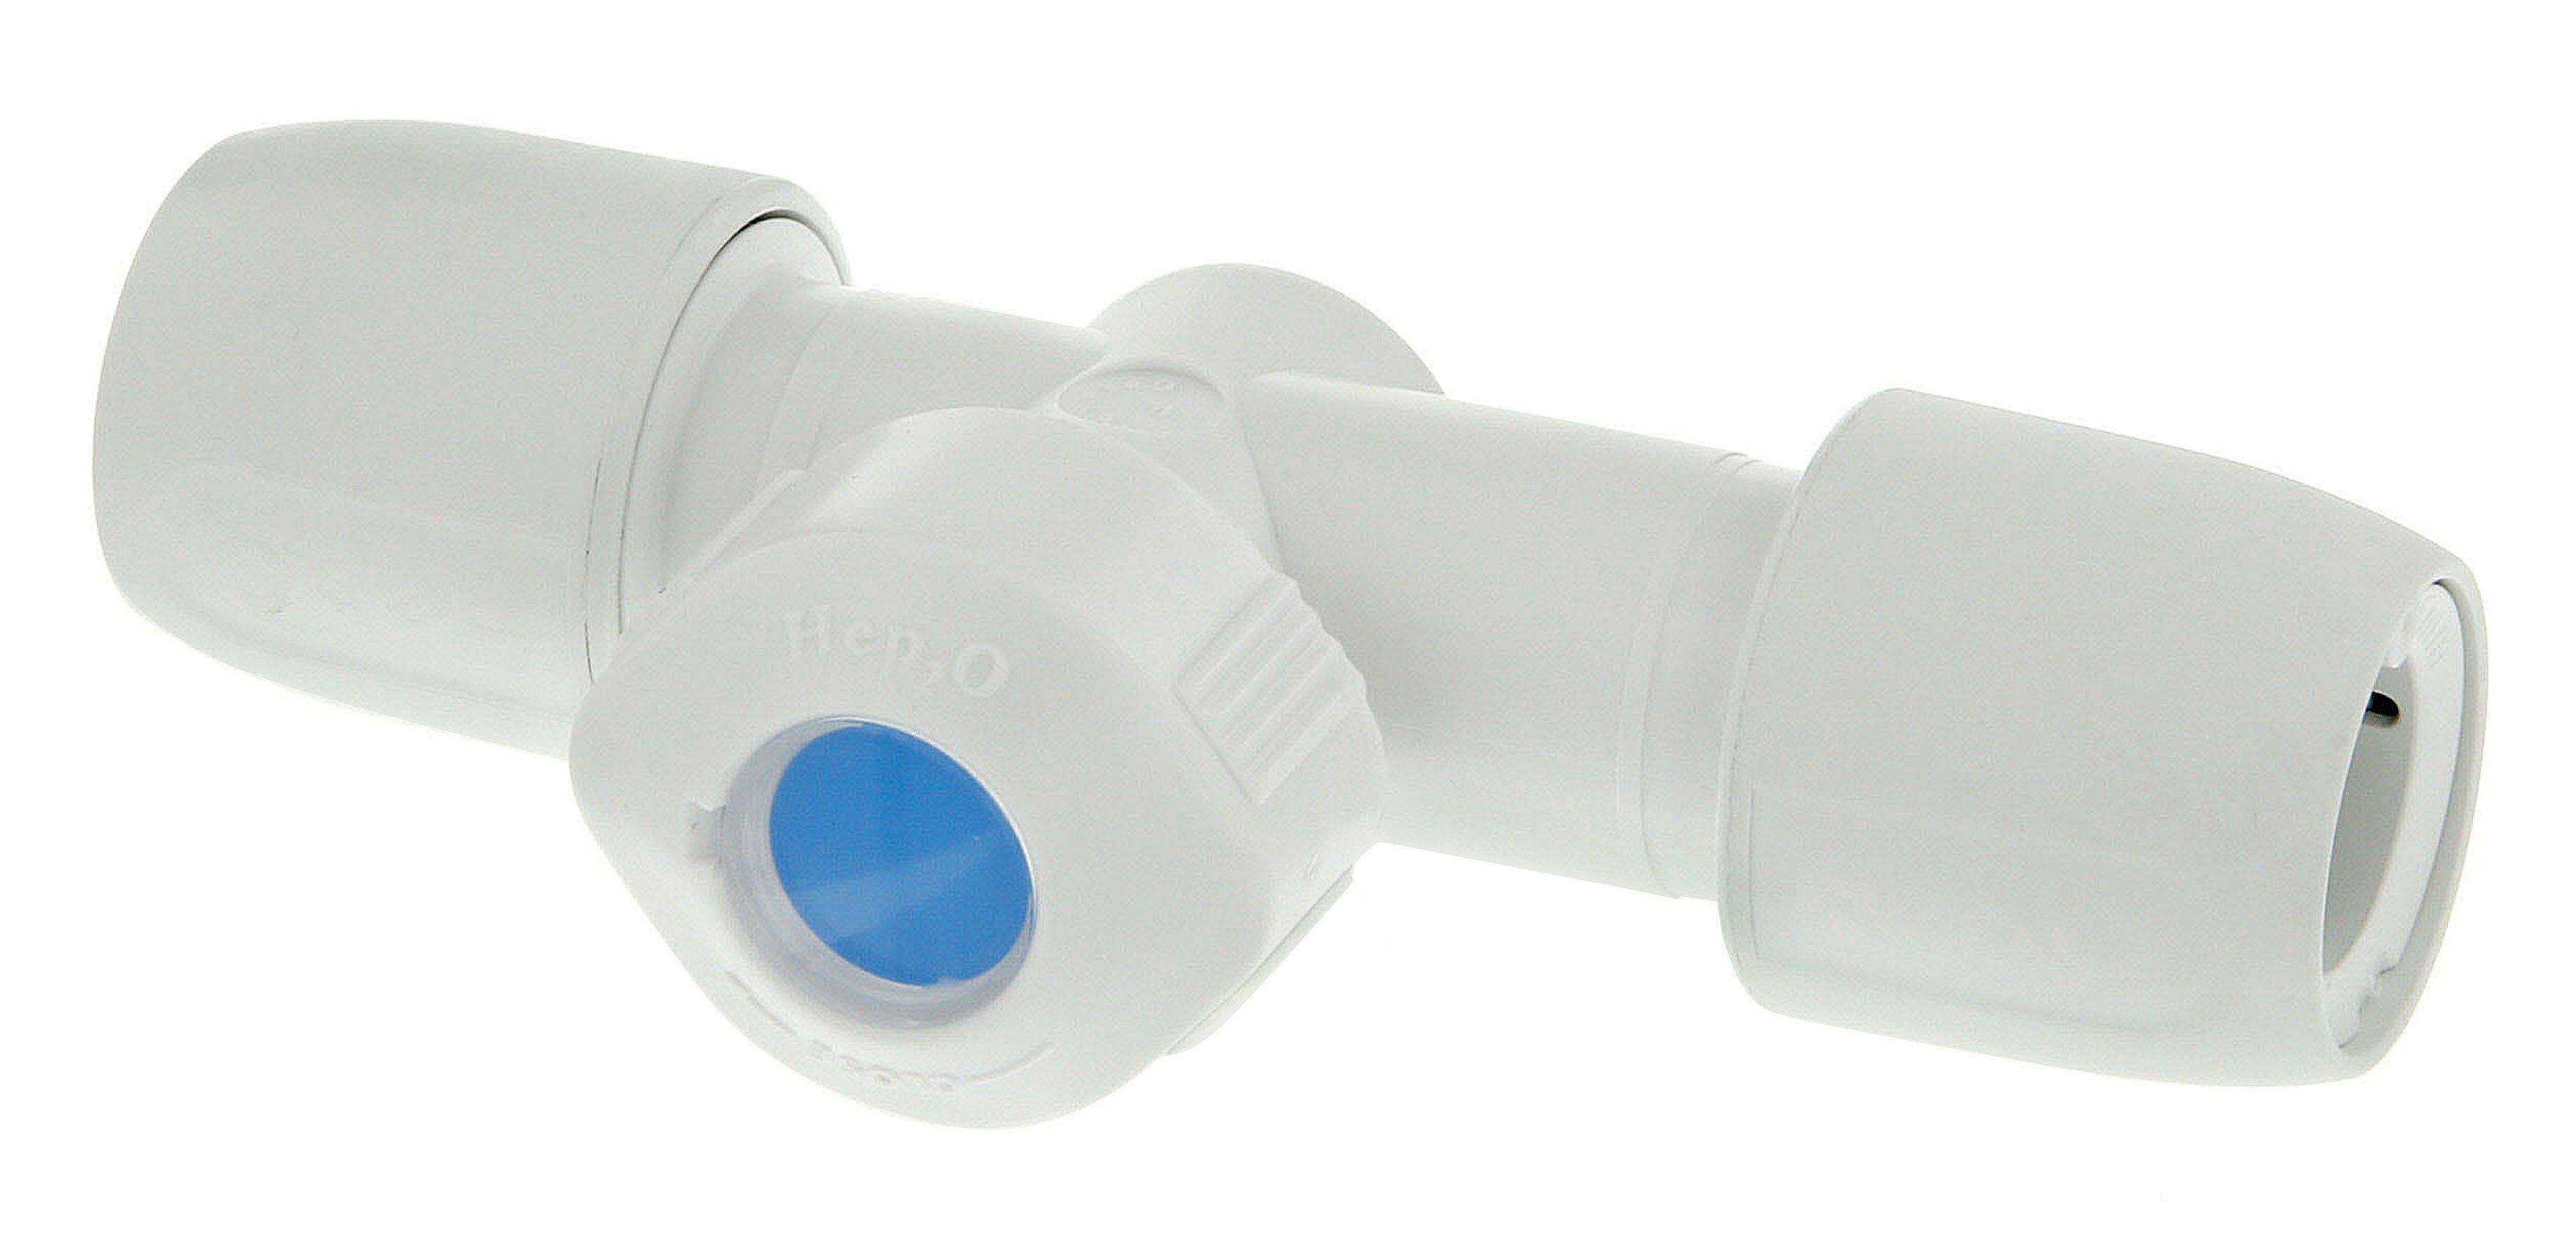 Image of Hep2O HX37/15WS Hot and Cold Shut Off Valve - 15 x 15mm